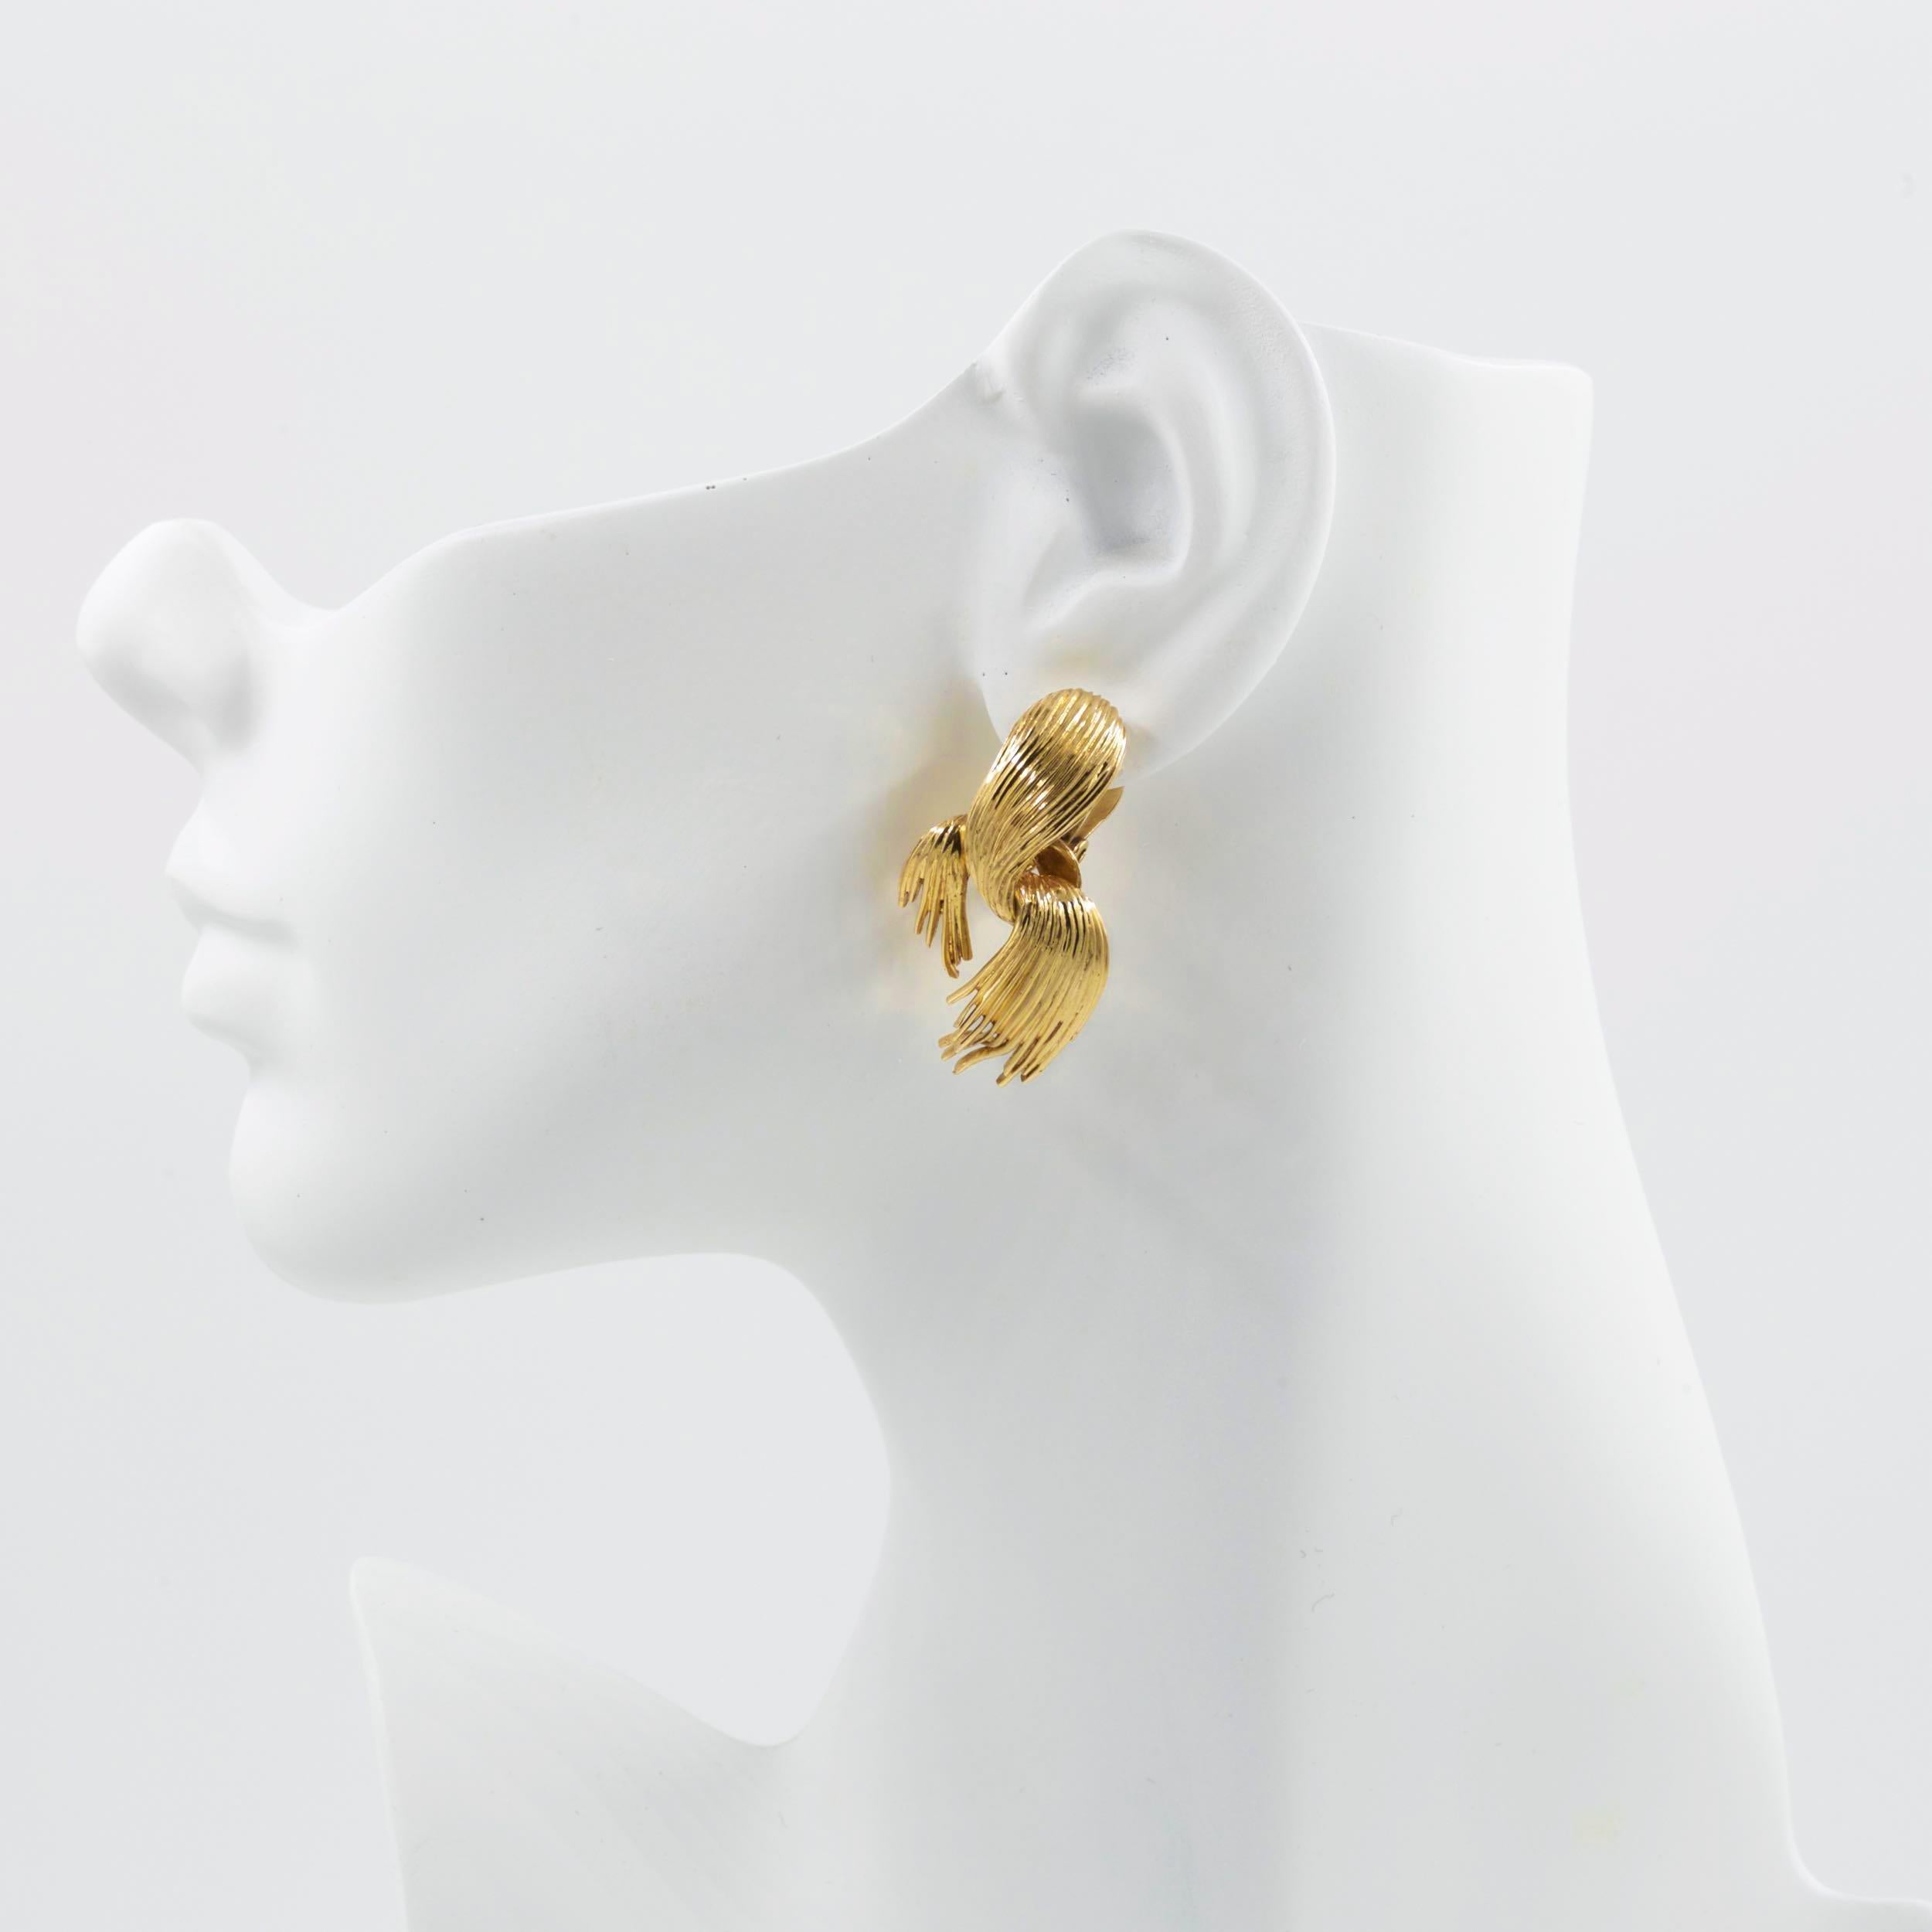 A stylish pair of 14k yellow gold earrings with swirled fronds, they are intricate and beautifully cast in two parts for a swiveling frond. Chaotic and interesting with gorgeous channeled texture, they feature a strong clip-on mechanism.

Item